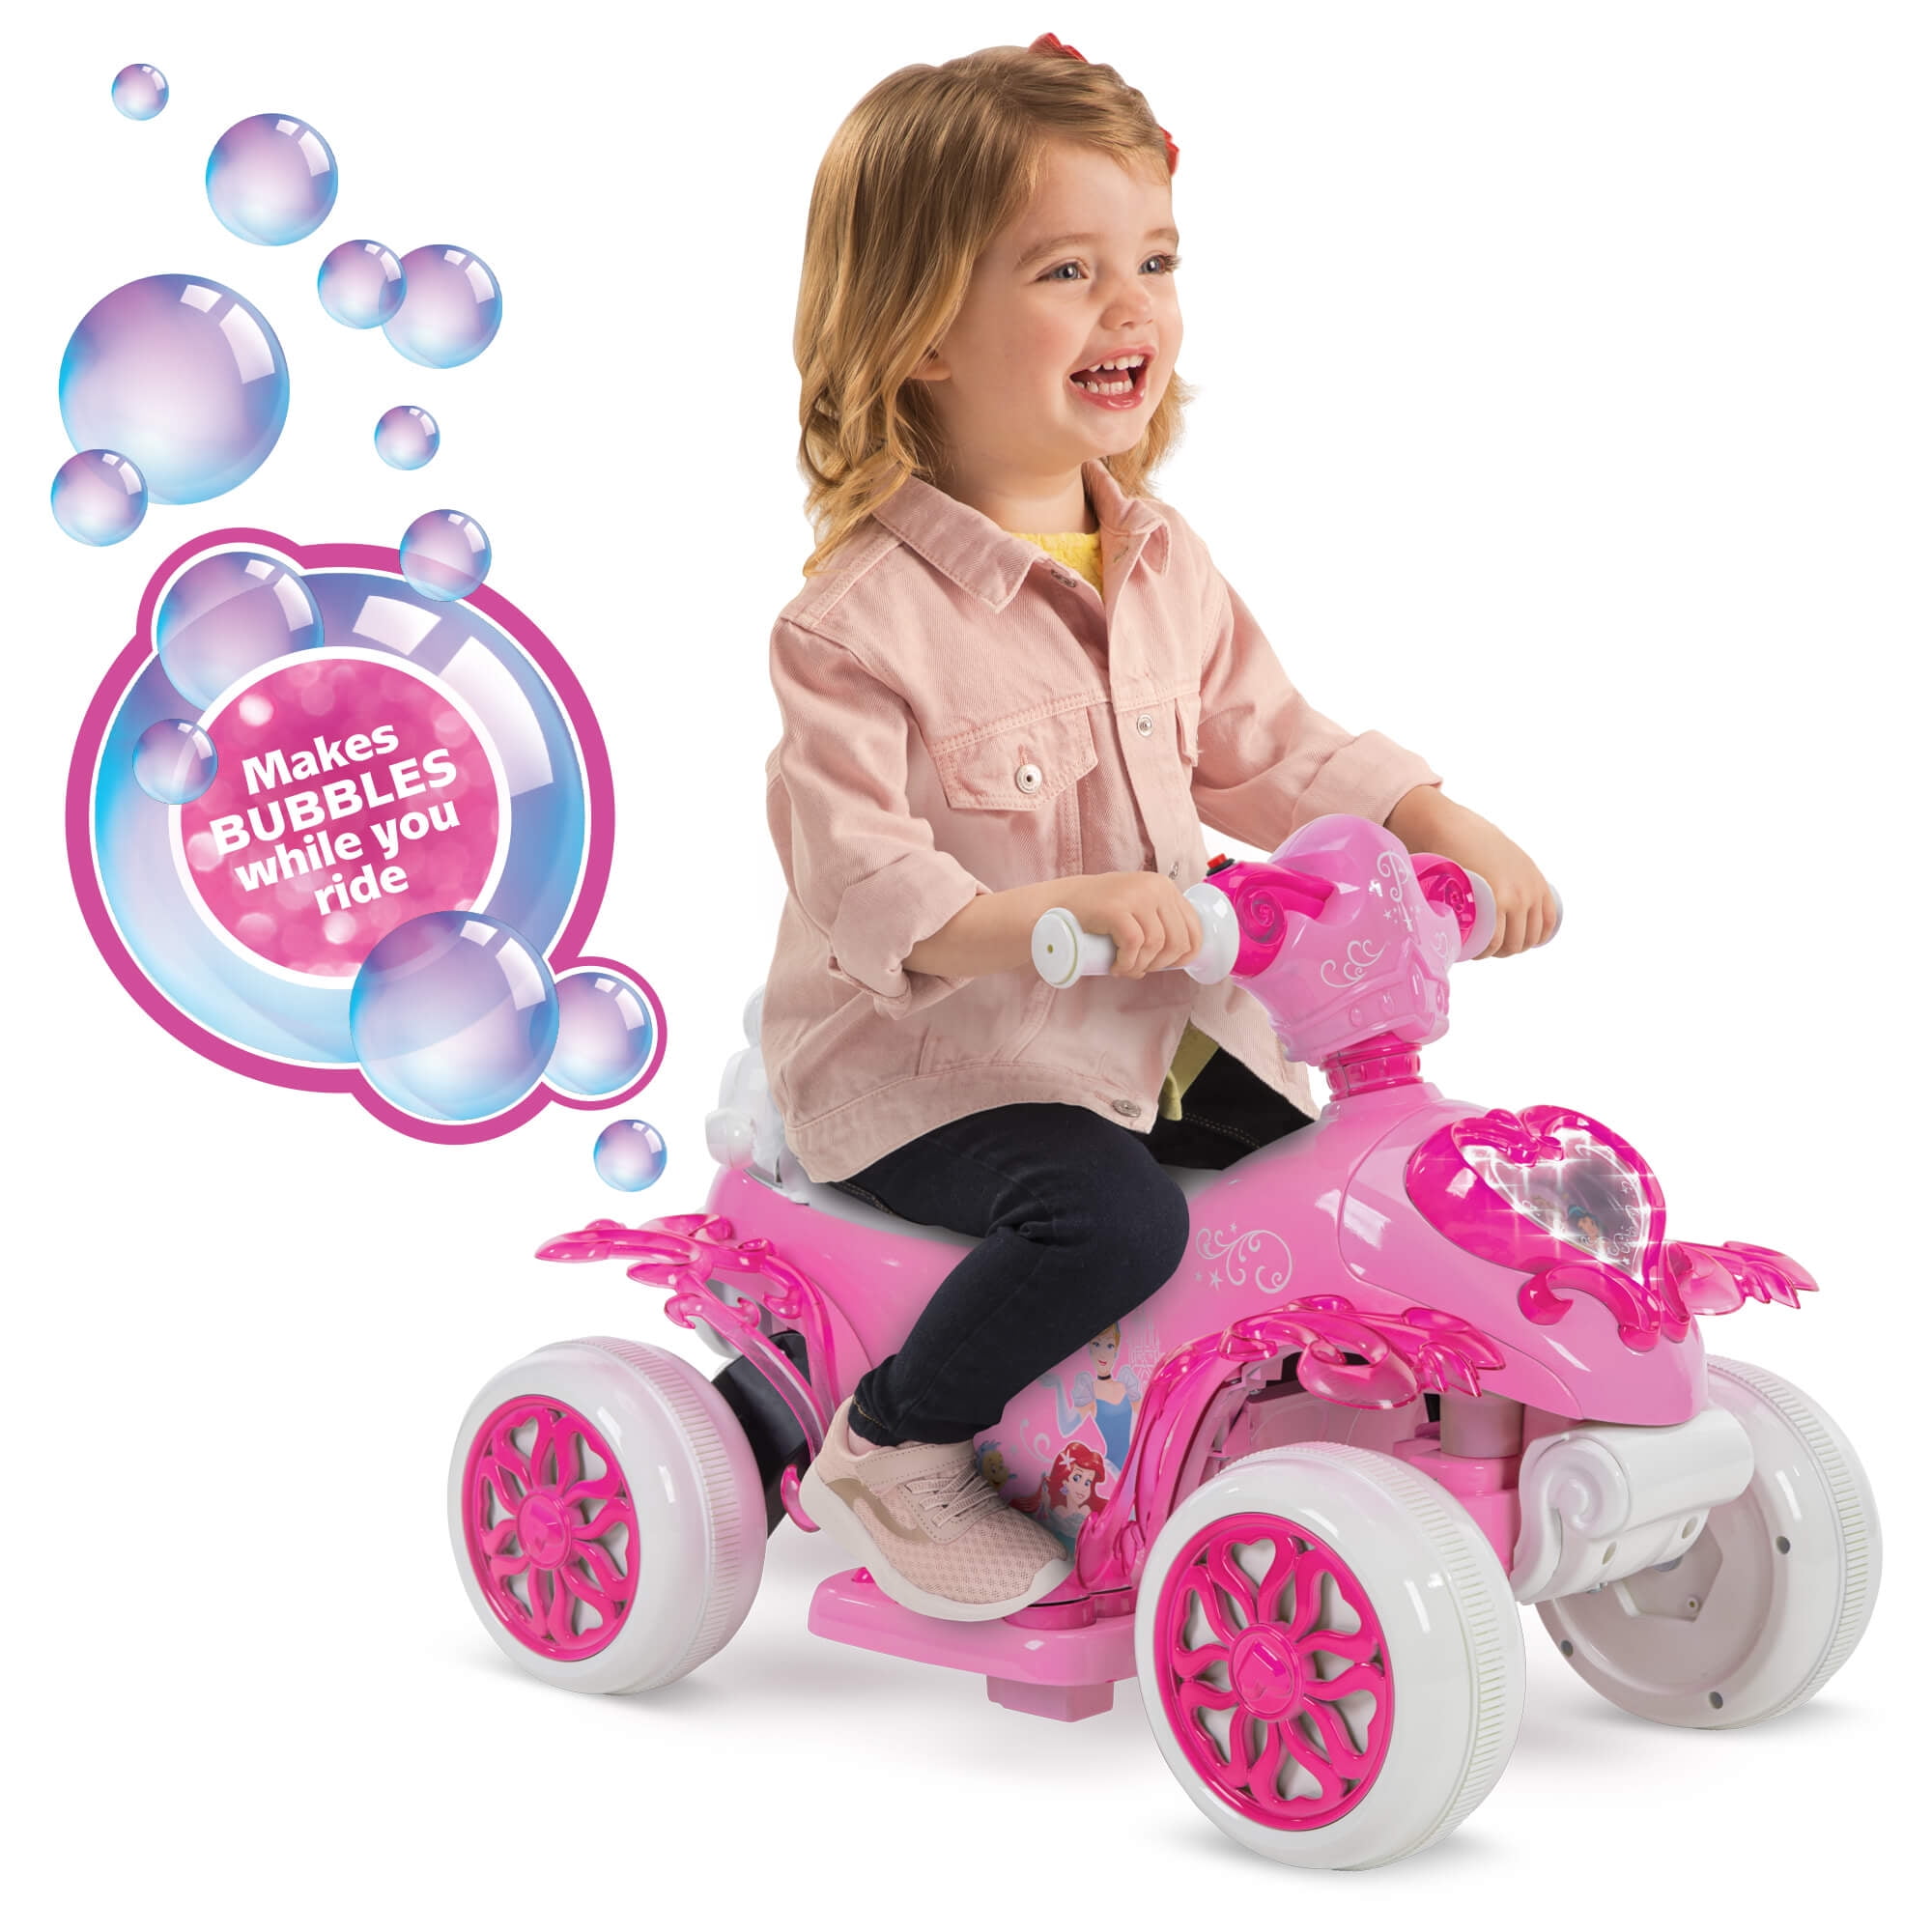 Disney's Minnie Mouse Toddler Ride-on Toy by Kid Trax for sale online 